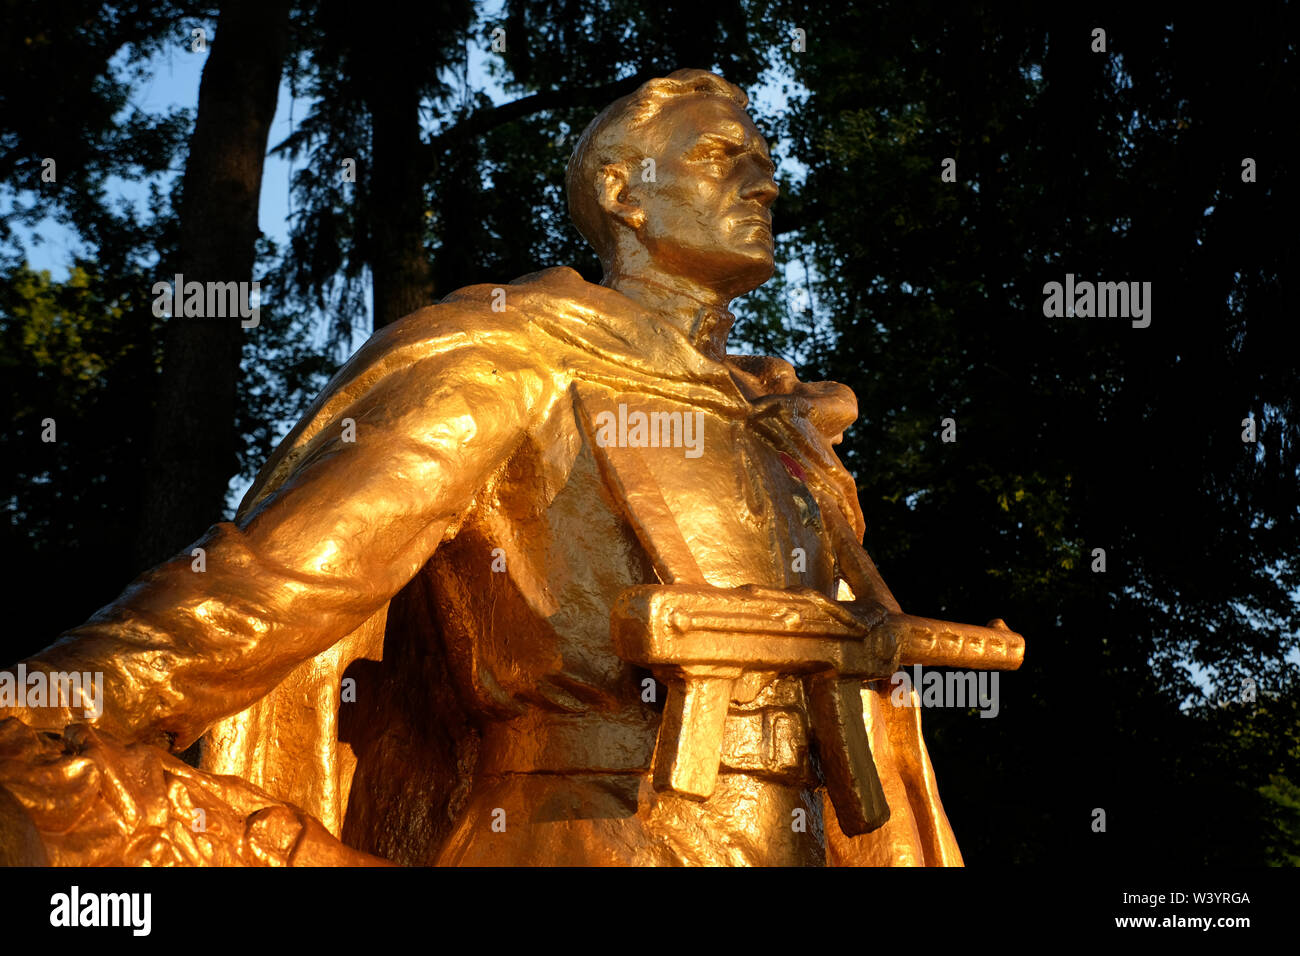 A gilded sculpture of a warrior-machine gunner at the monument complex to Peter Barbashov Hero of the Soviet Union located on the route Vladikavkaz - Alagir, near the village of Gizel in the Republic of North Ossetia-Alania the North Caucasian Federal District of Russia. Stock Photo